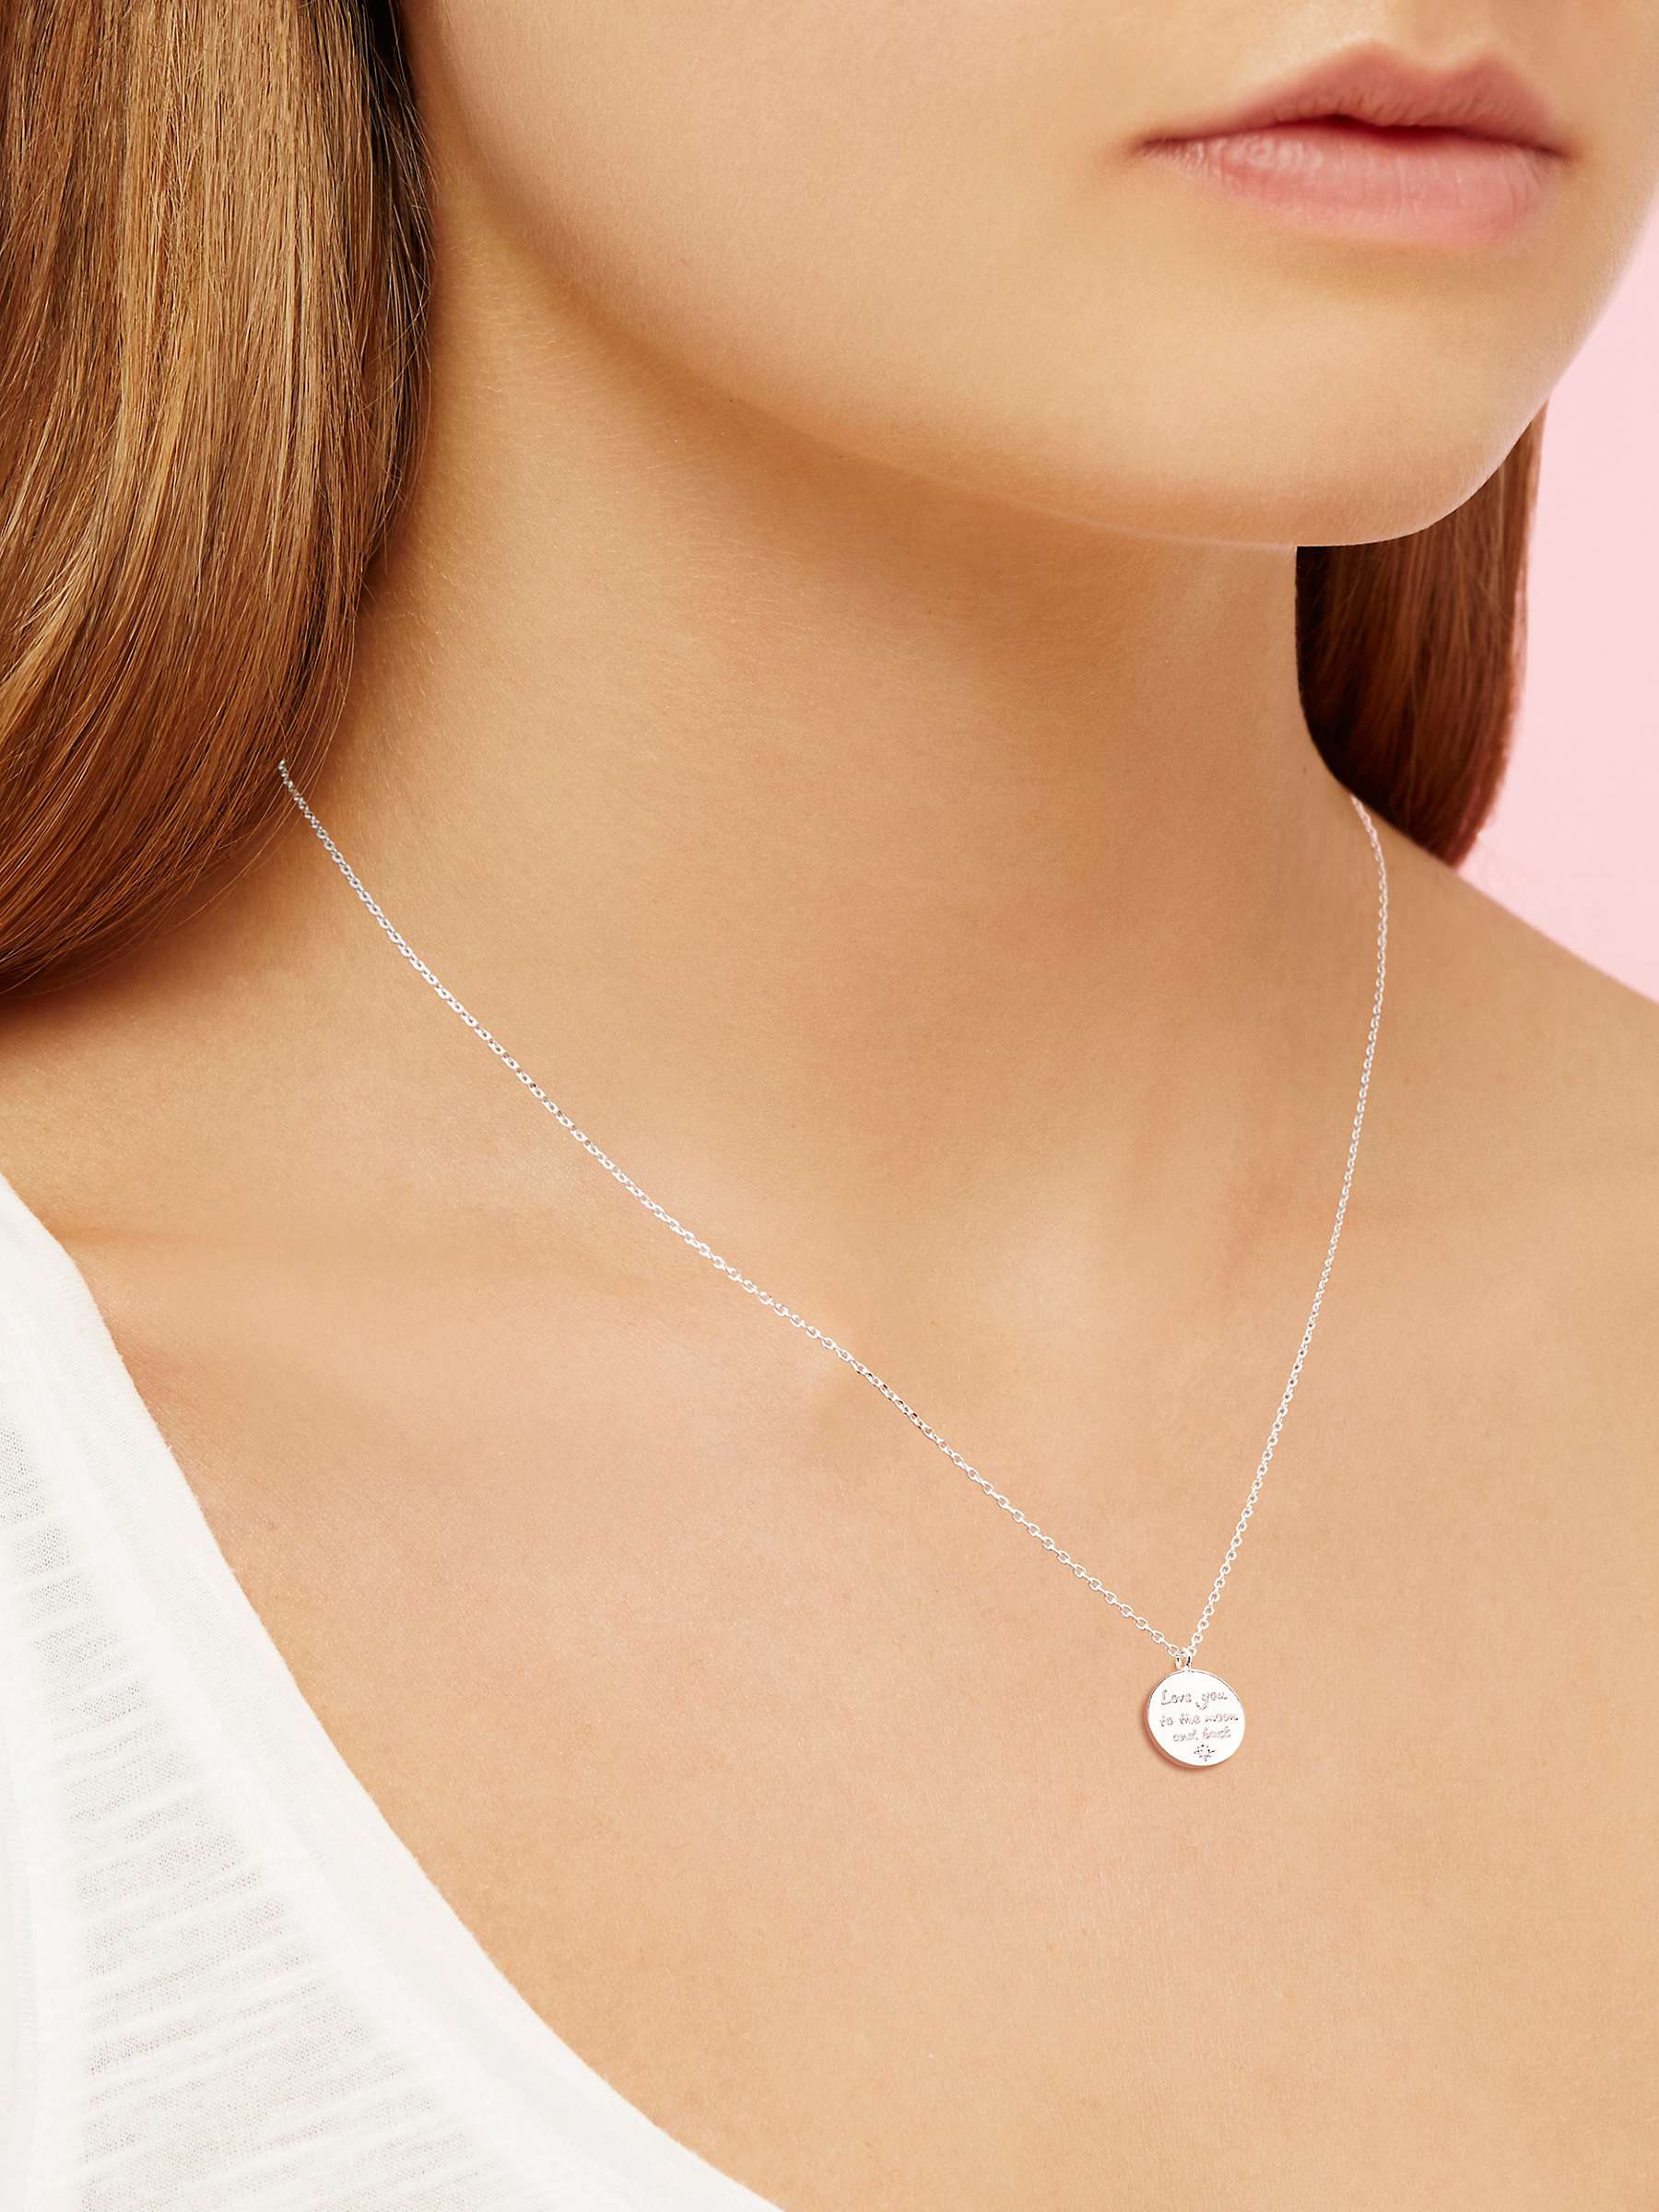 Buy Estella Bartlett Love You To The Moon and Back Pendant Necklace, Silver Online at johnlewis.com